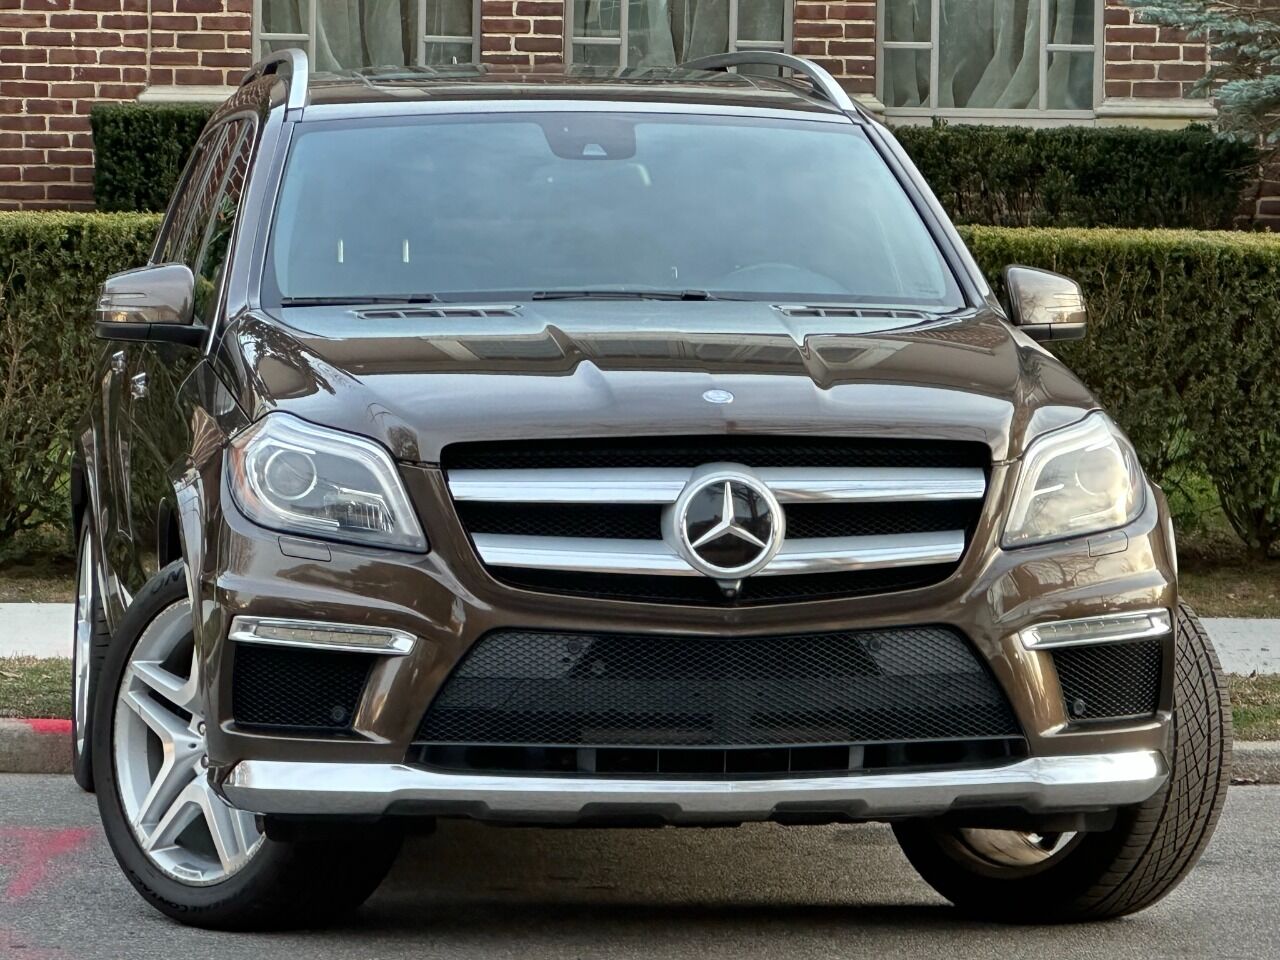 2014 MERCEDES-BENZ GL-Class SUV / Crossover - $22,900